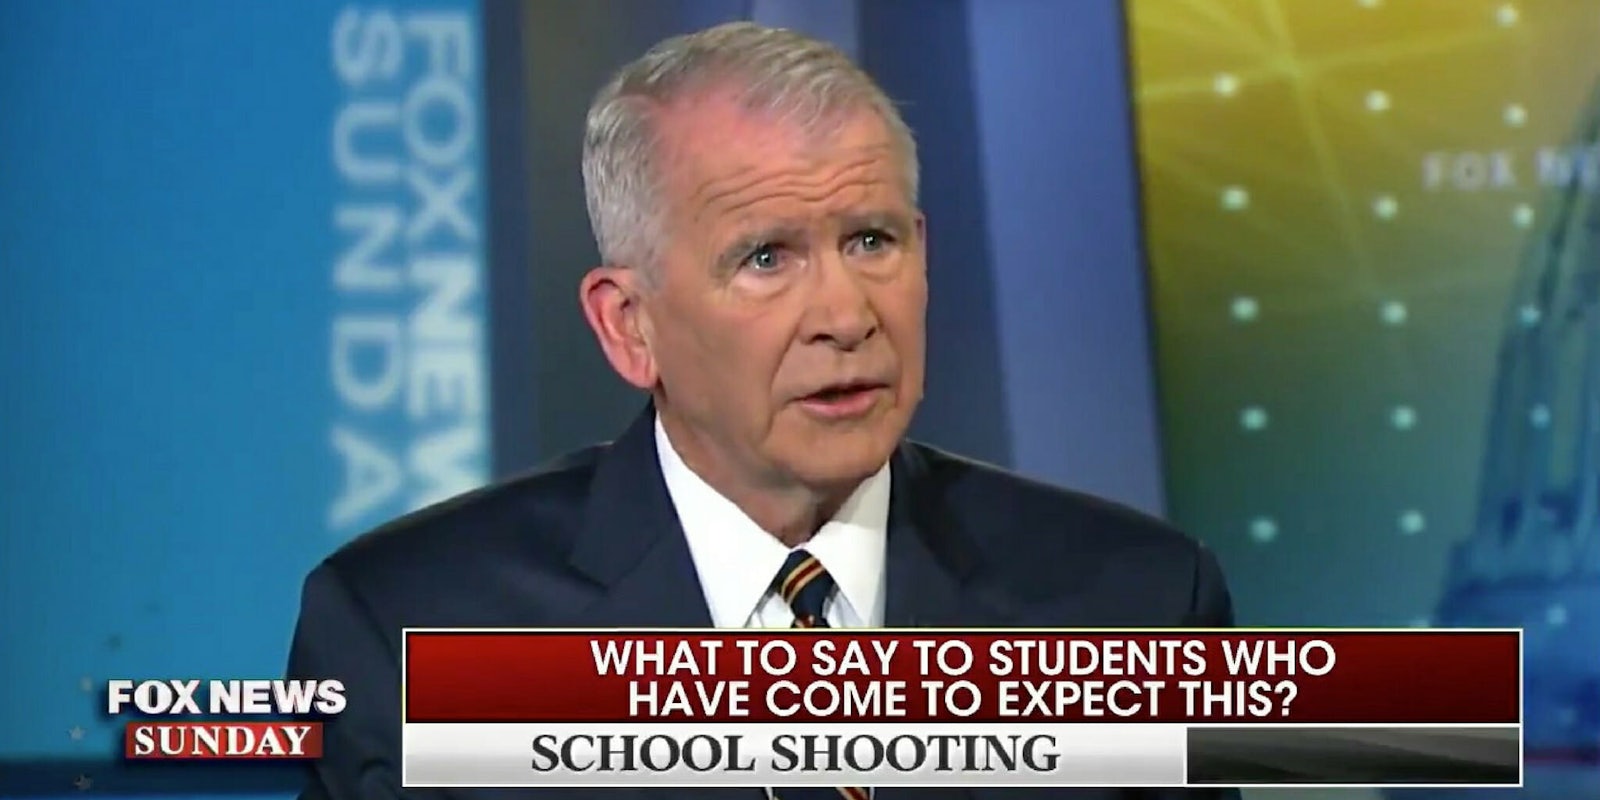 Future NRA president Oliver North stating on Fox News Sunday that ritalin is the cause of school shootings.